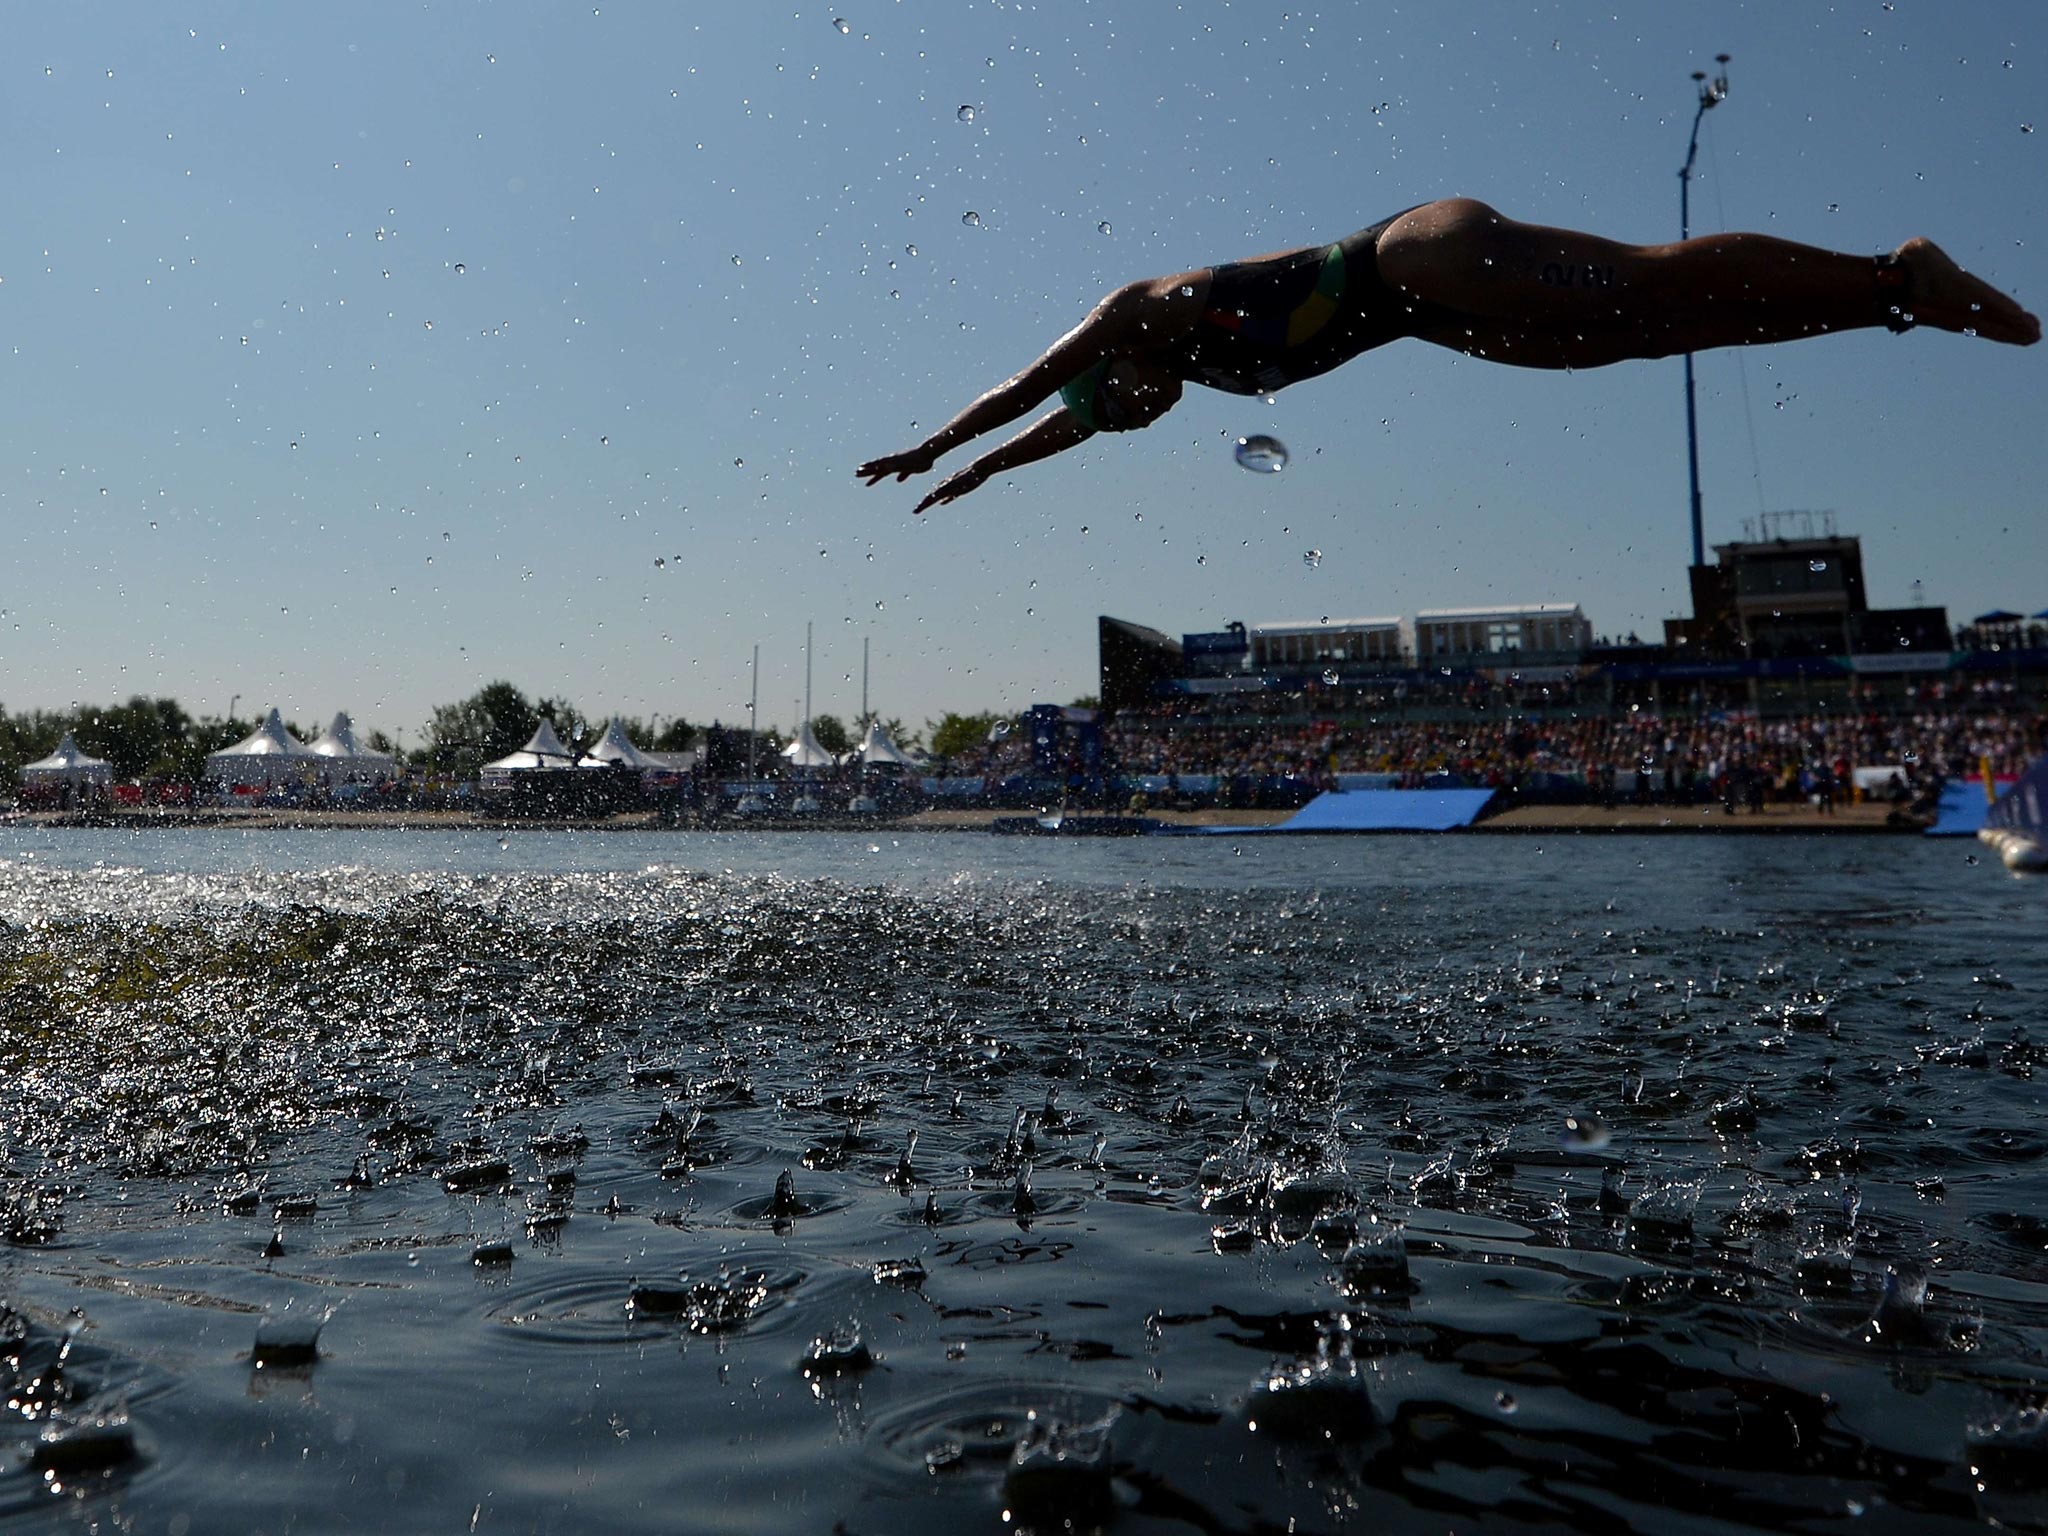 An athlete dives into the water after the first lap of the swim phase during the Women's Triathlon during the 2014 Commonwealth Games